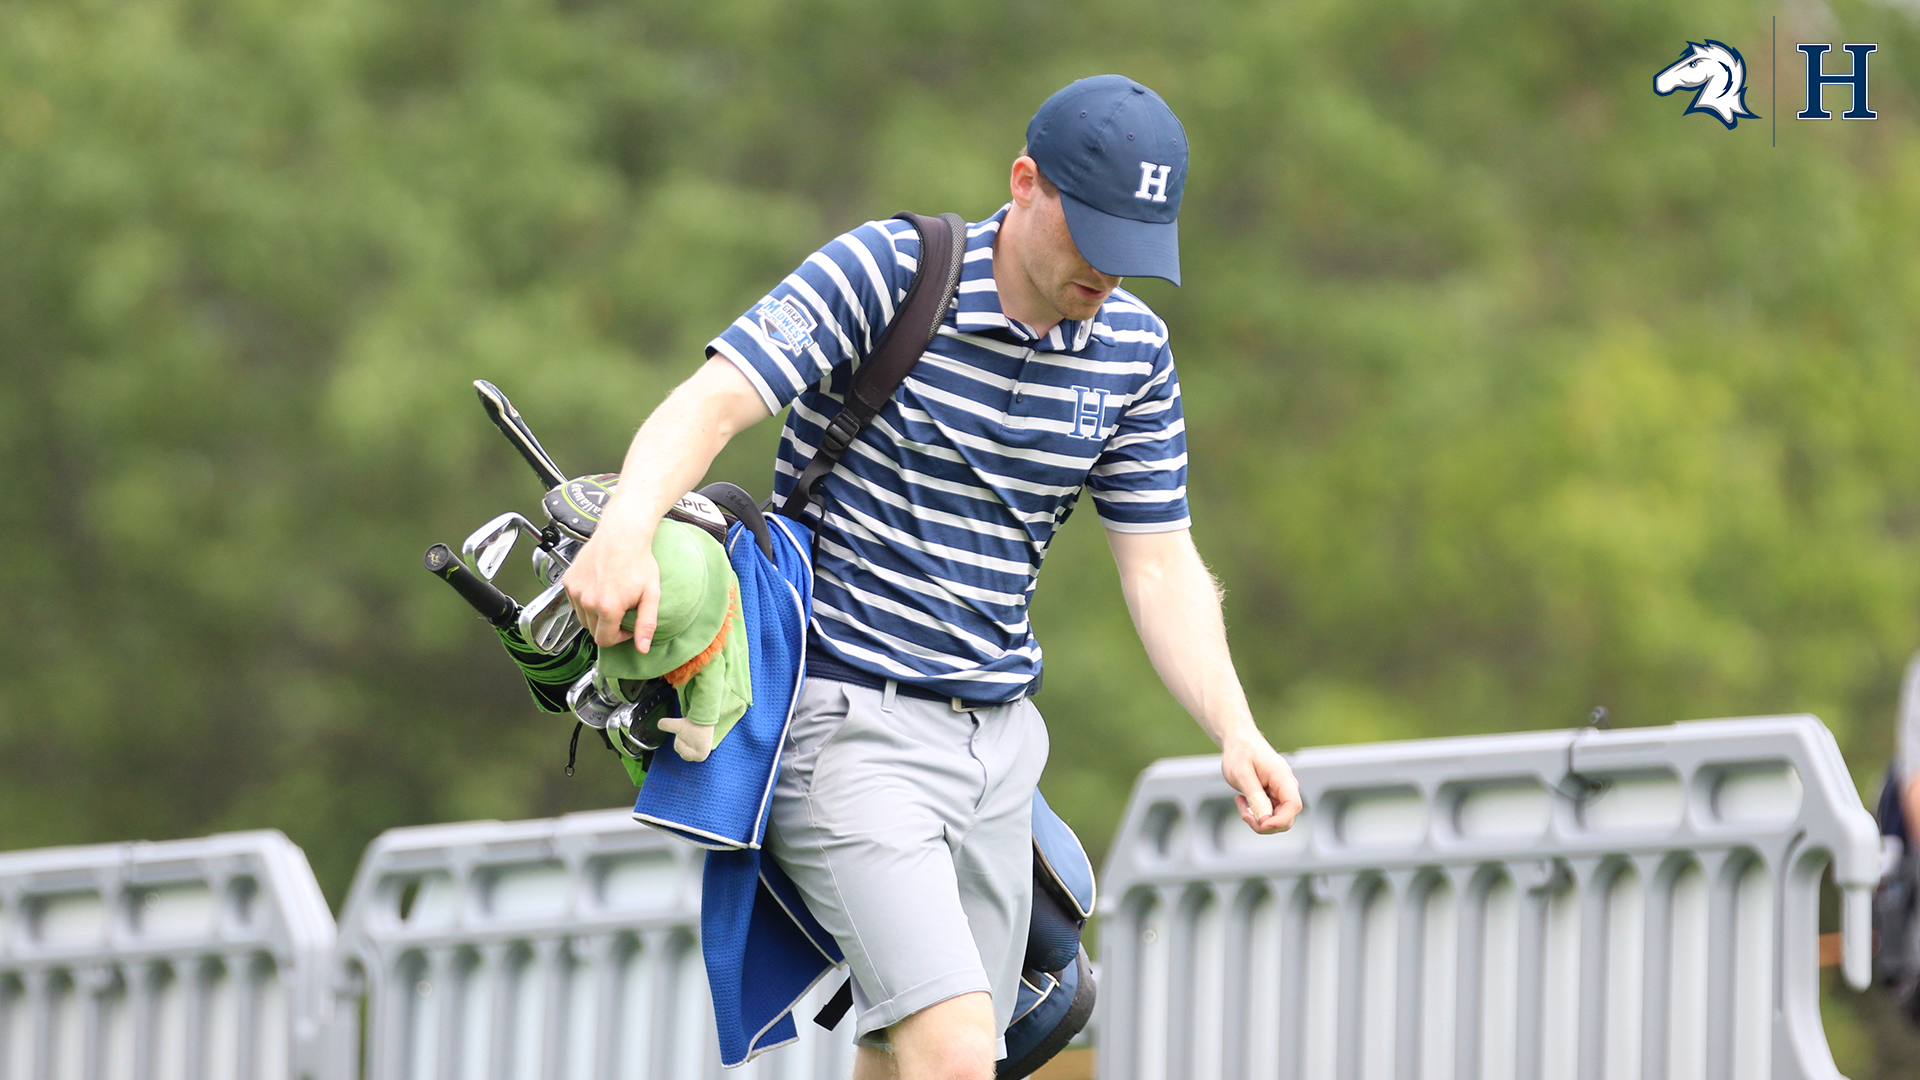 Charger men’s golf team to host Bell Collegiate invitational at Mid Pines Golf Club next week